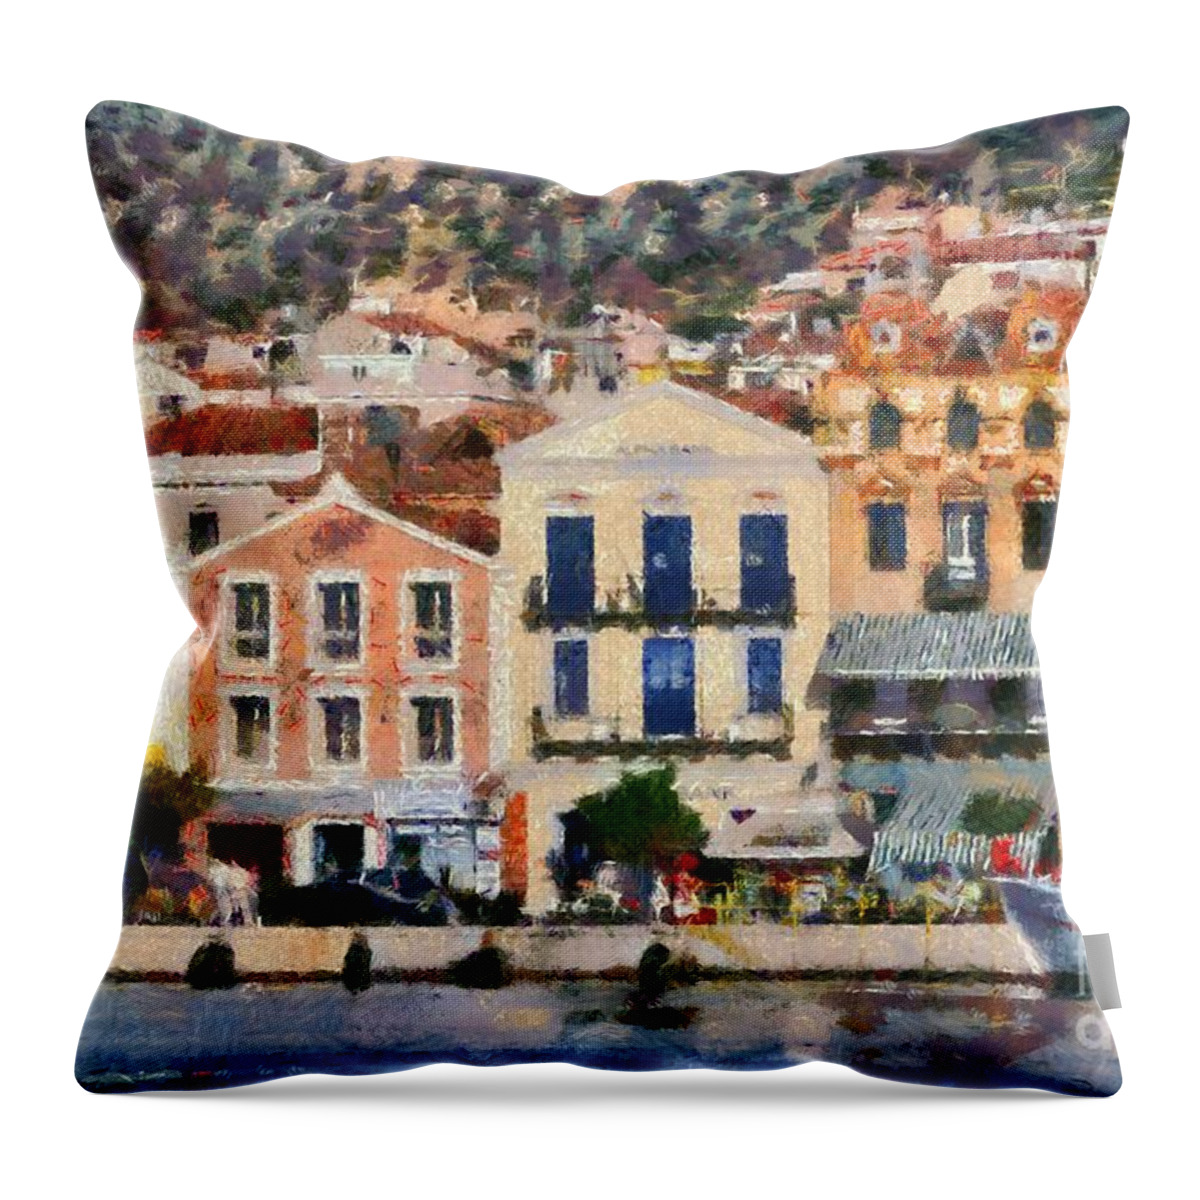 Lesvos; Lesbos; Mytilini; Mitilini; Mytilene; City; Town; Port; Harbor; Islands; Greece; Hellas; Greek; Aegean; Island; Summer; Holidays; Vacation; Tourism; Touristic; Travel; Trip; Voyage; Journey; Buildings; Tradition; Traditional; Architecture; Design; Bank Throw Pillow featuring the painting Mytilini port #8 by George Atsametakis